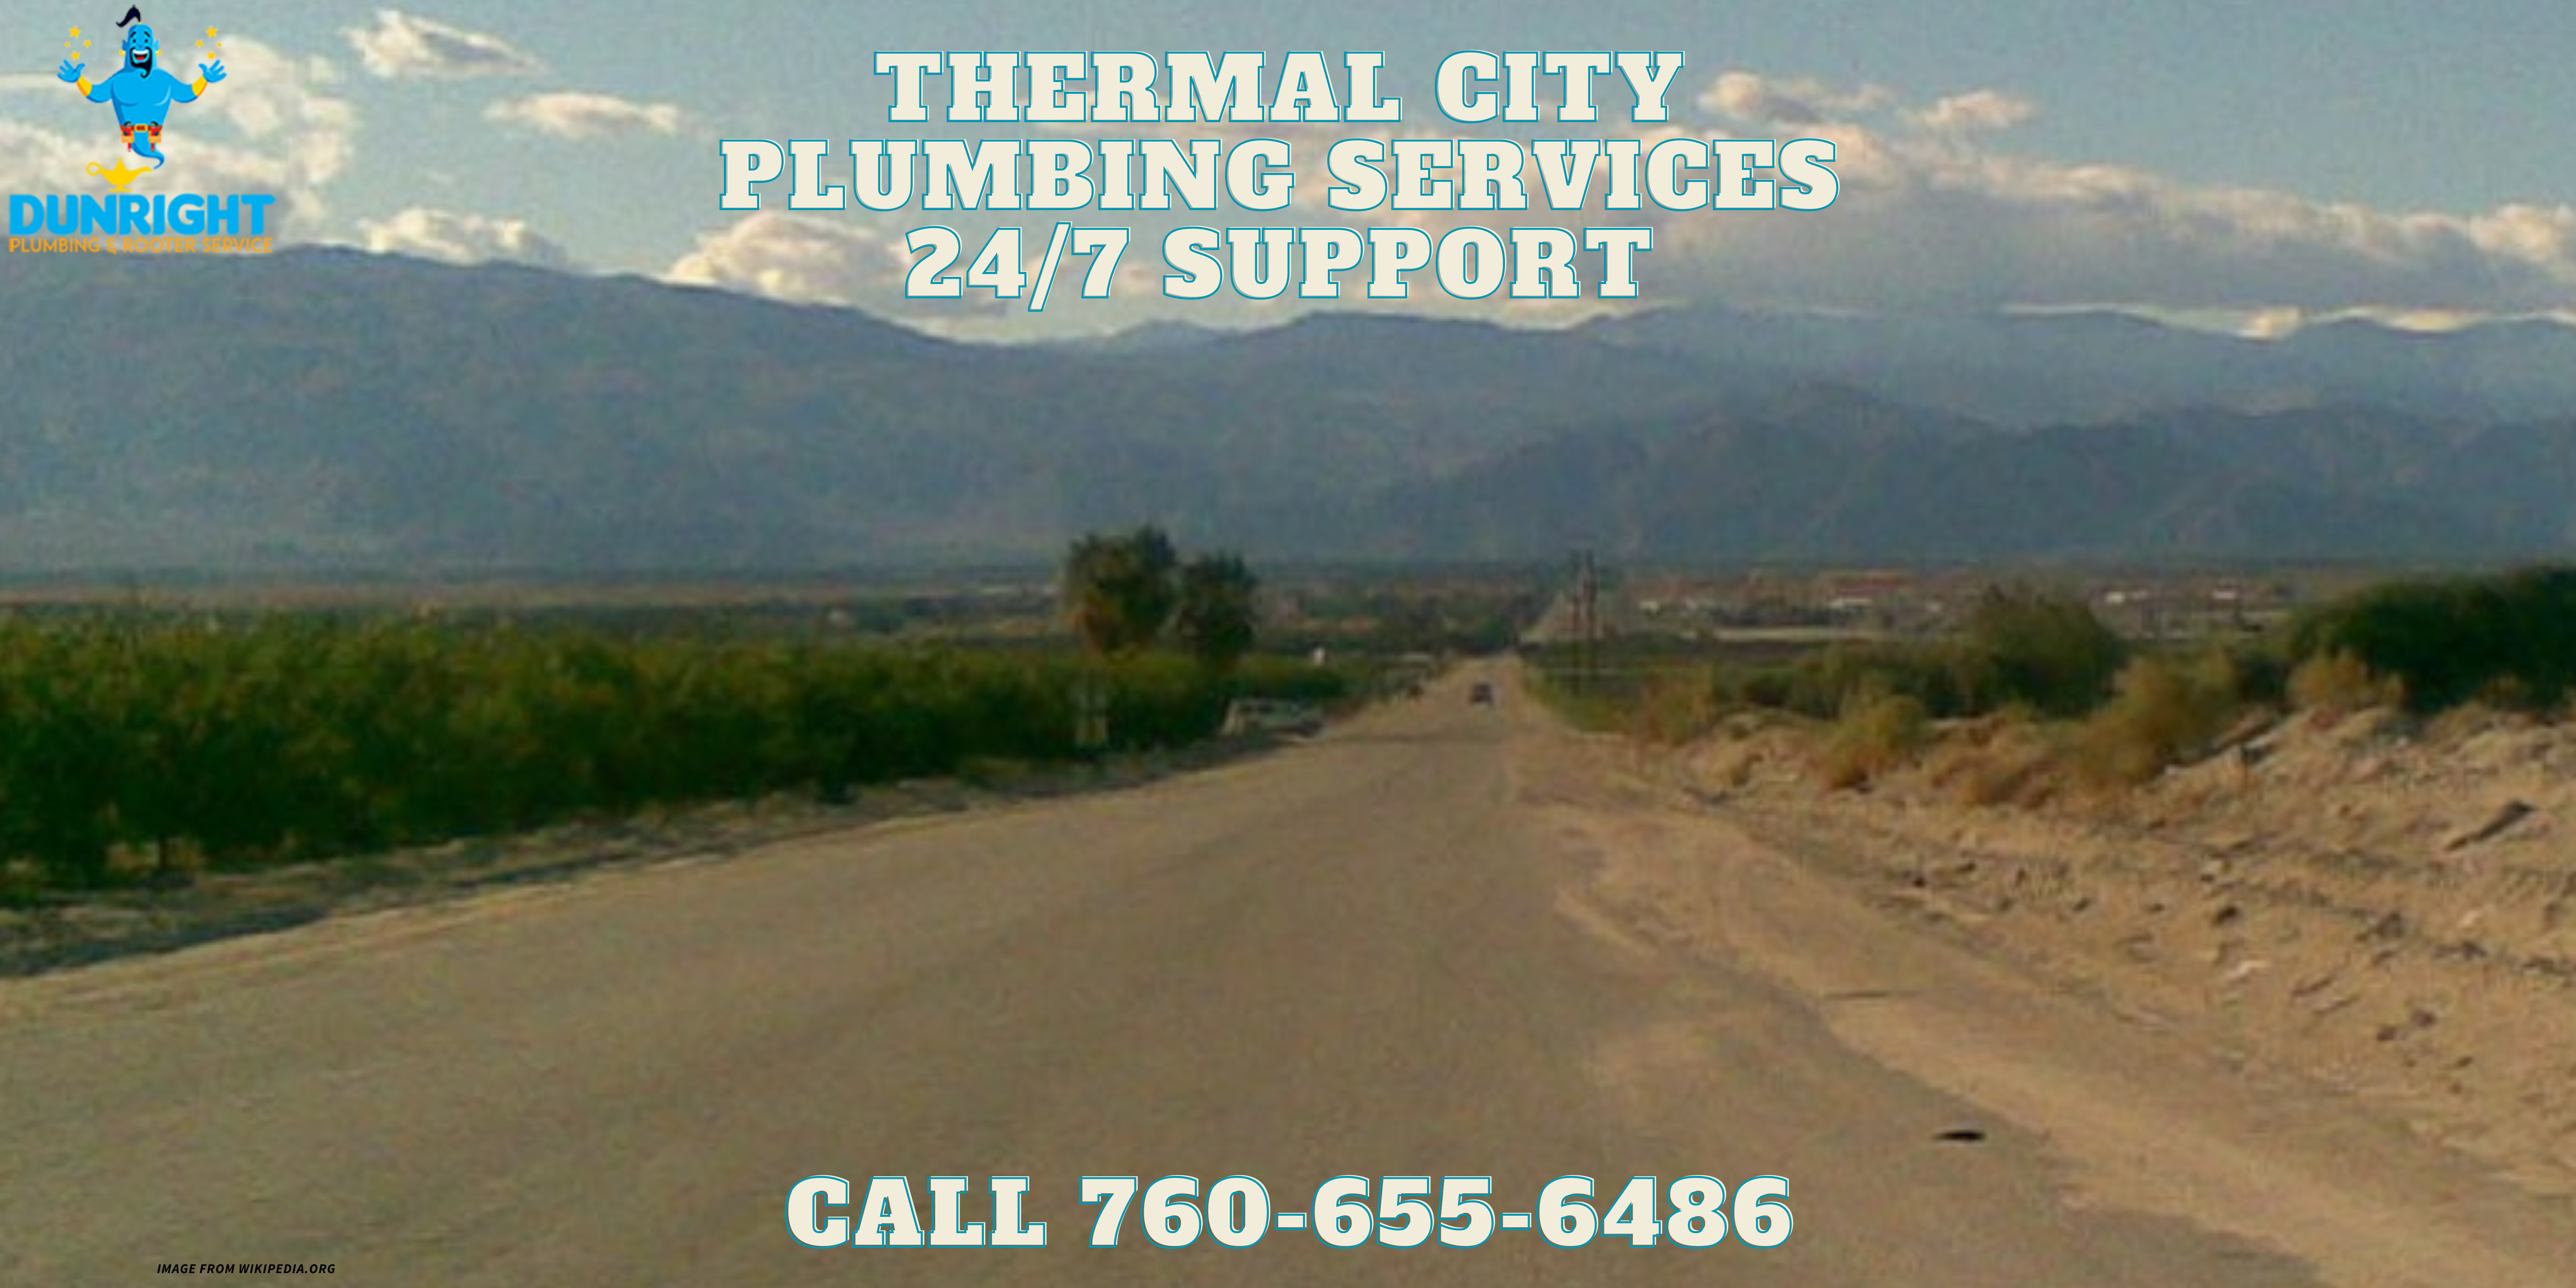 Thermal City Plumbing Services